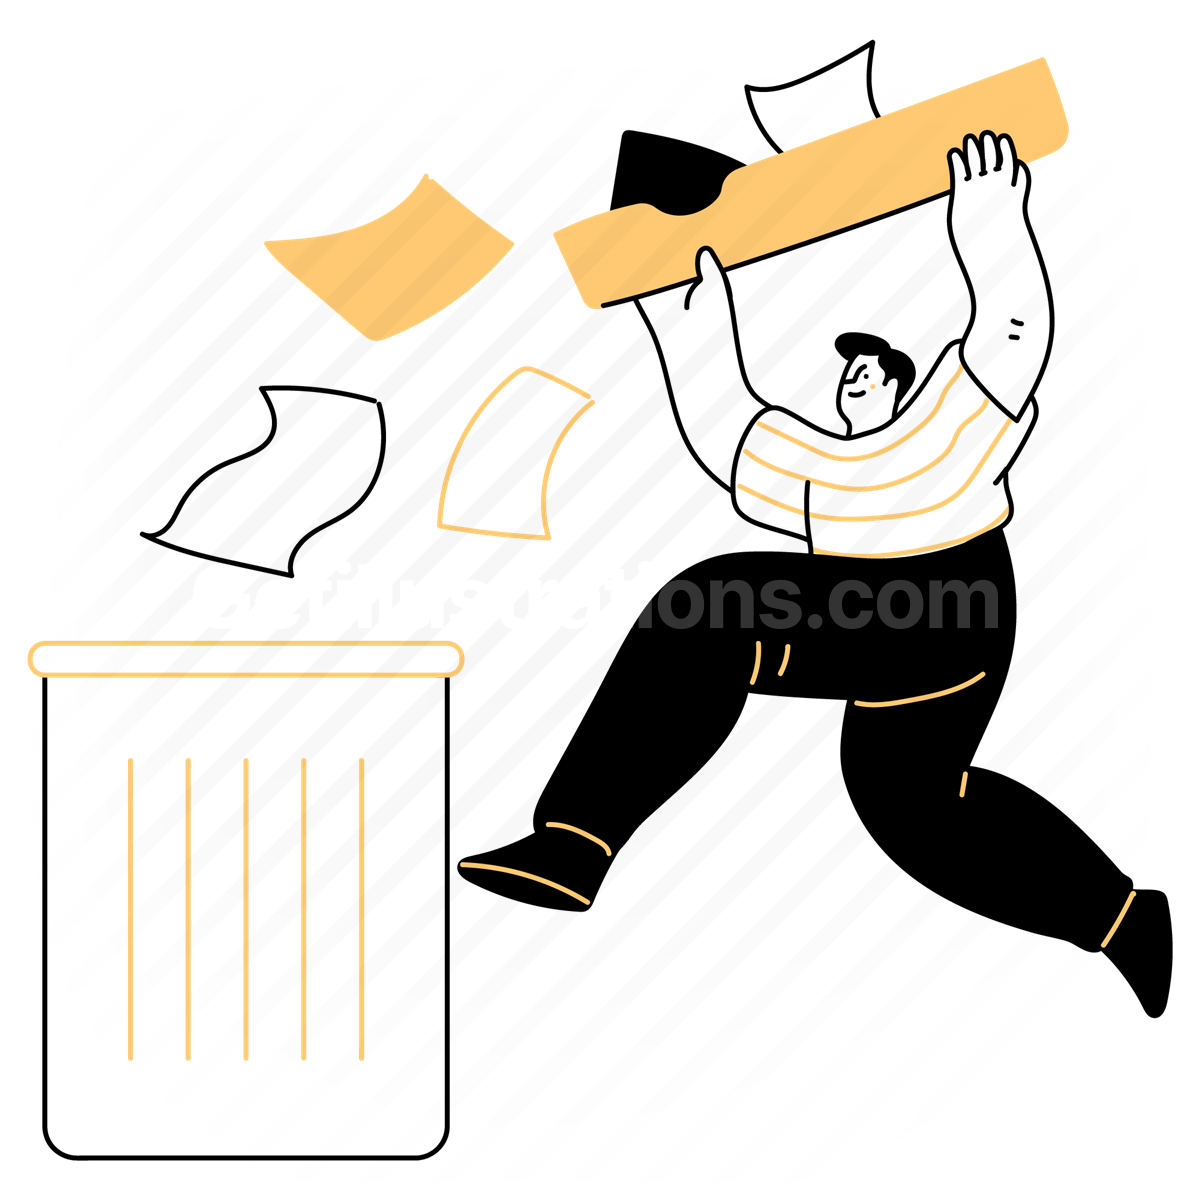 trash, garbage, bin, delete, remove, papers, papertray, document